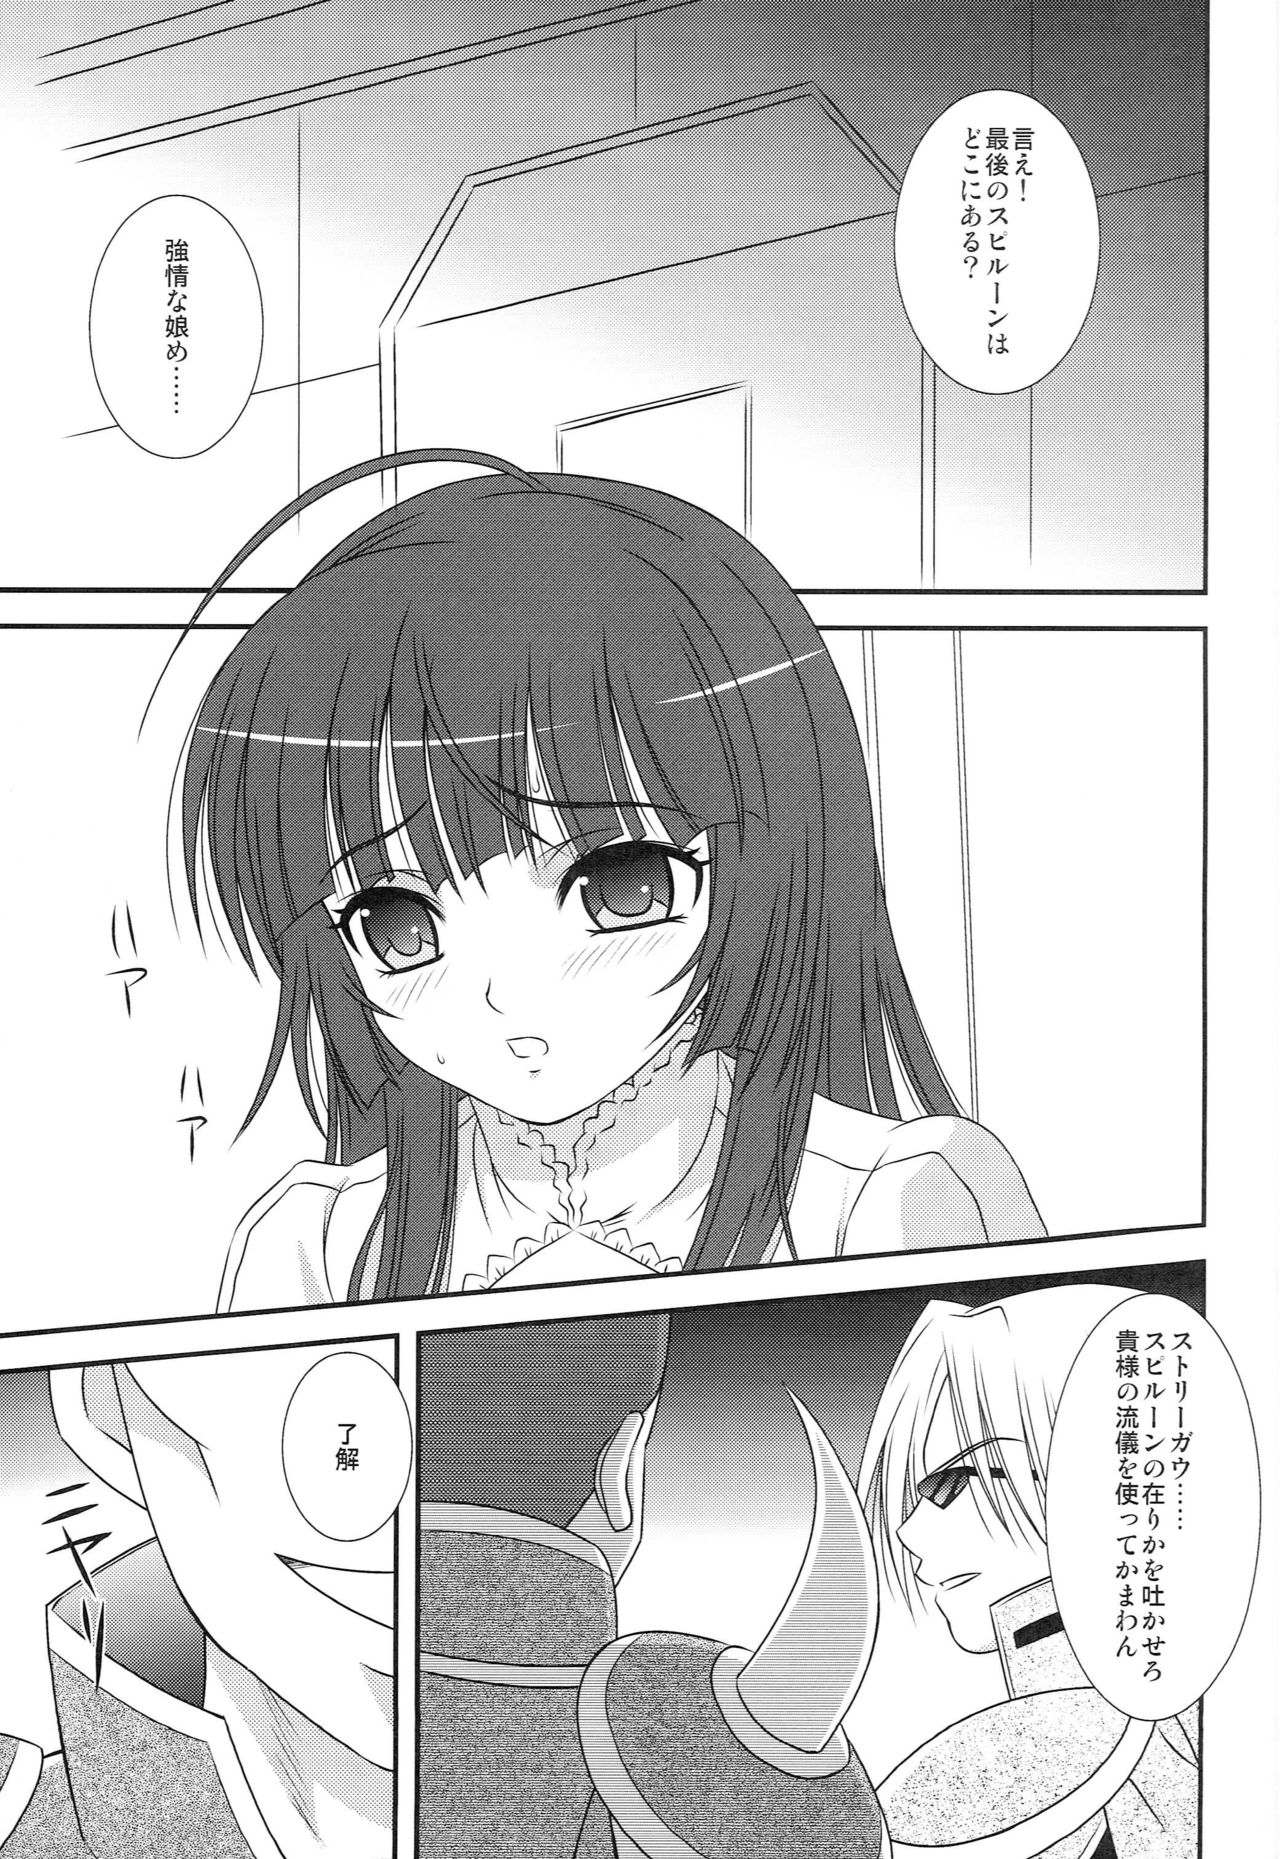 (COMIC1☆3) [PIECES (Hidaka Ryou)] Brave Heart (Tales of Hearts) page 4 full